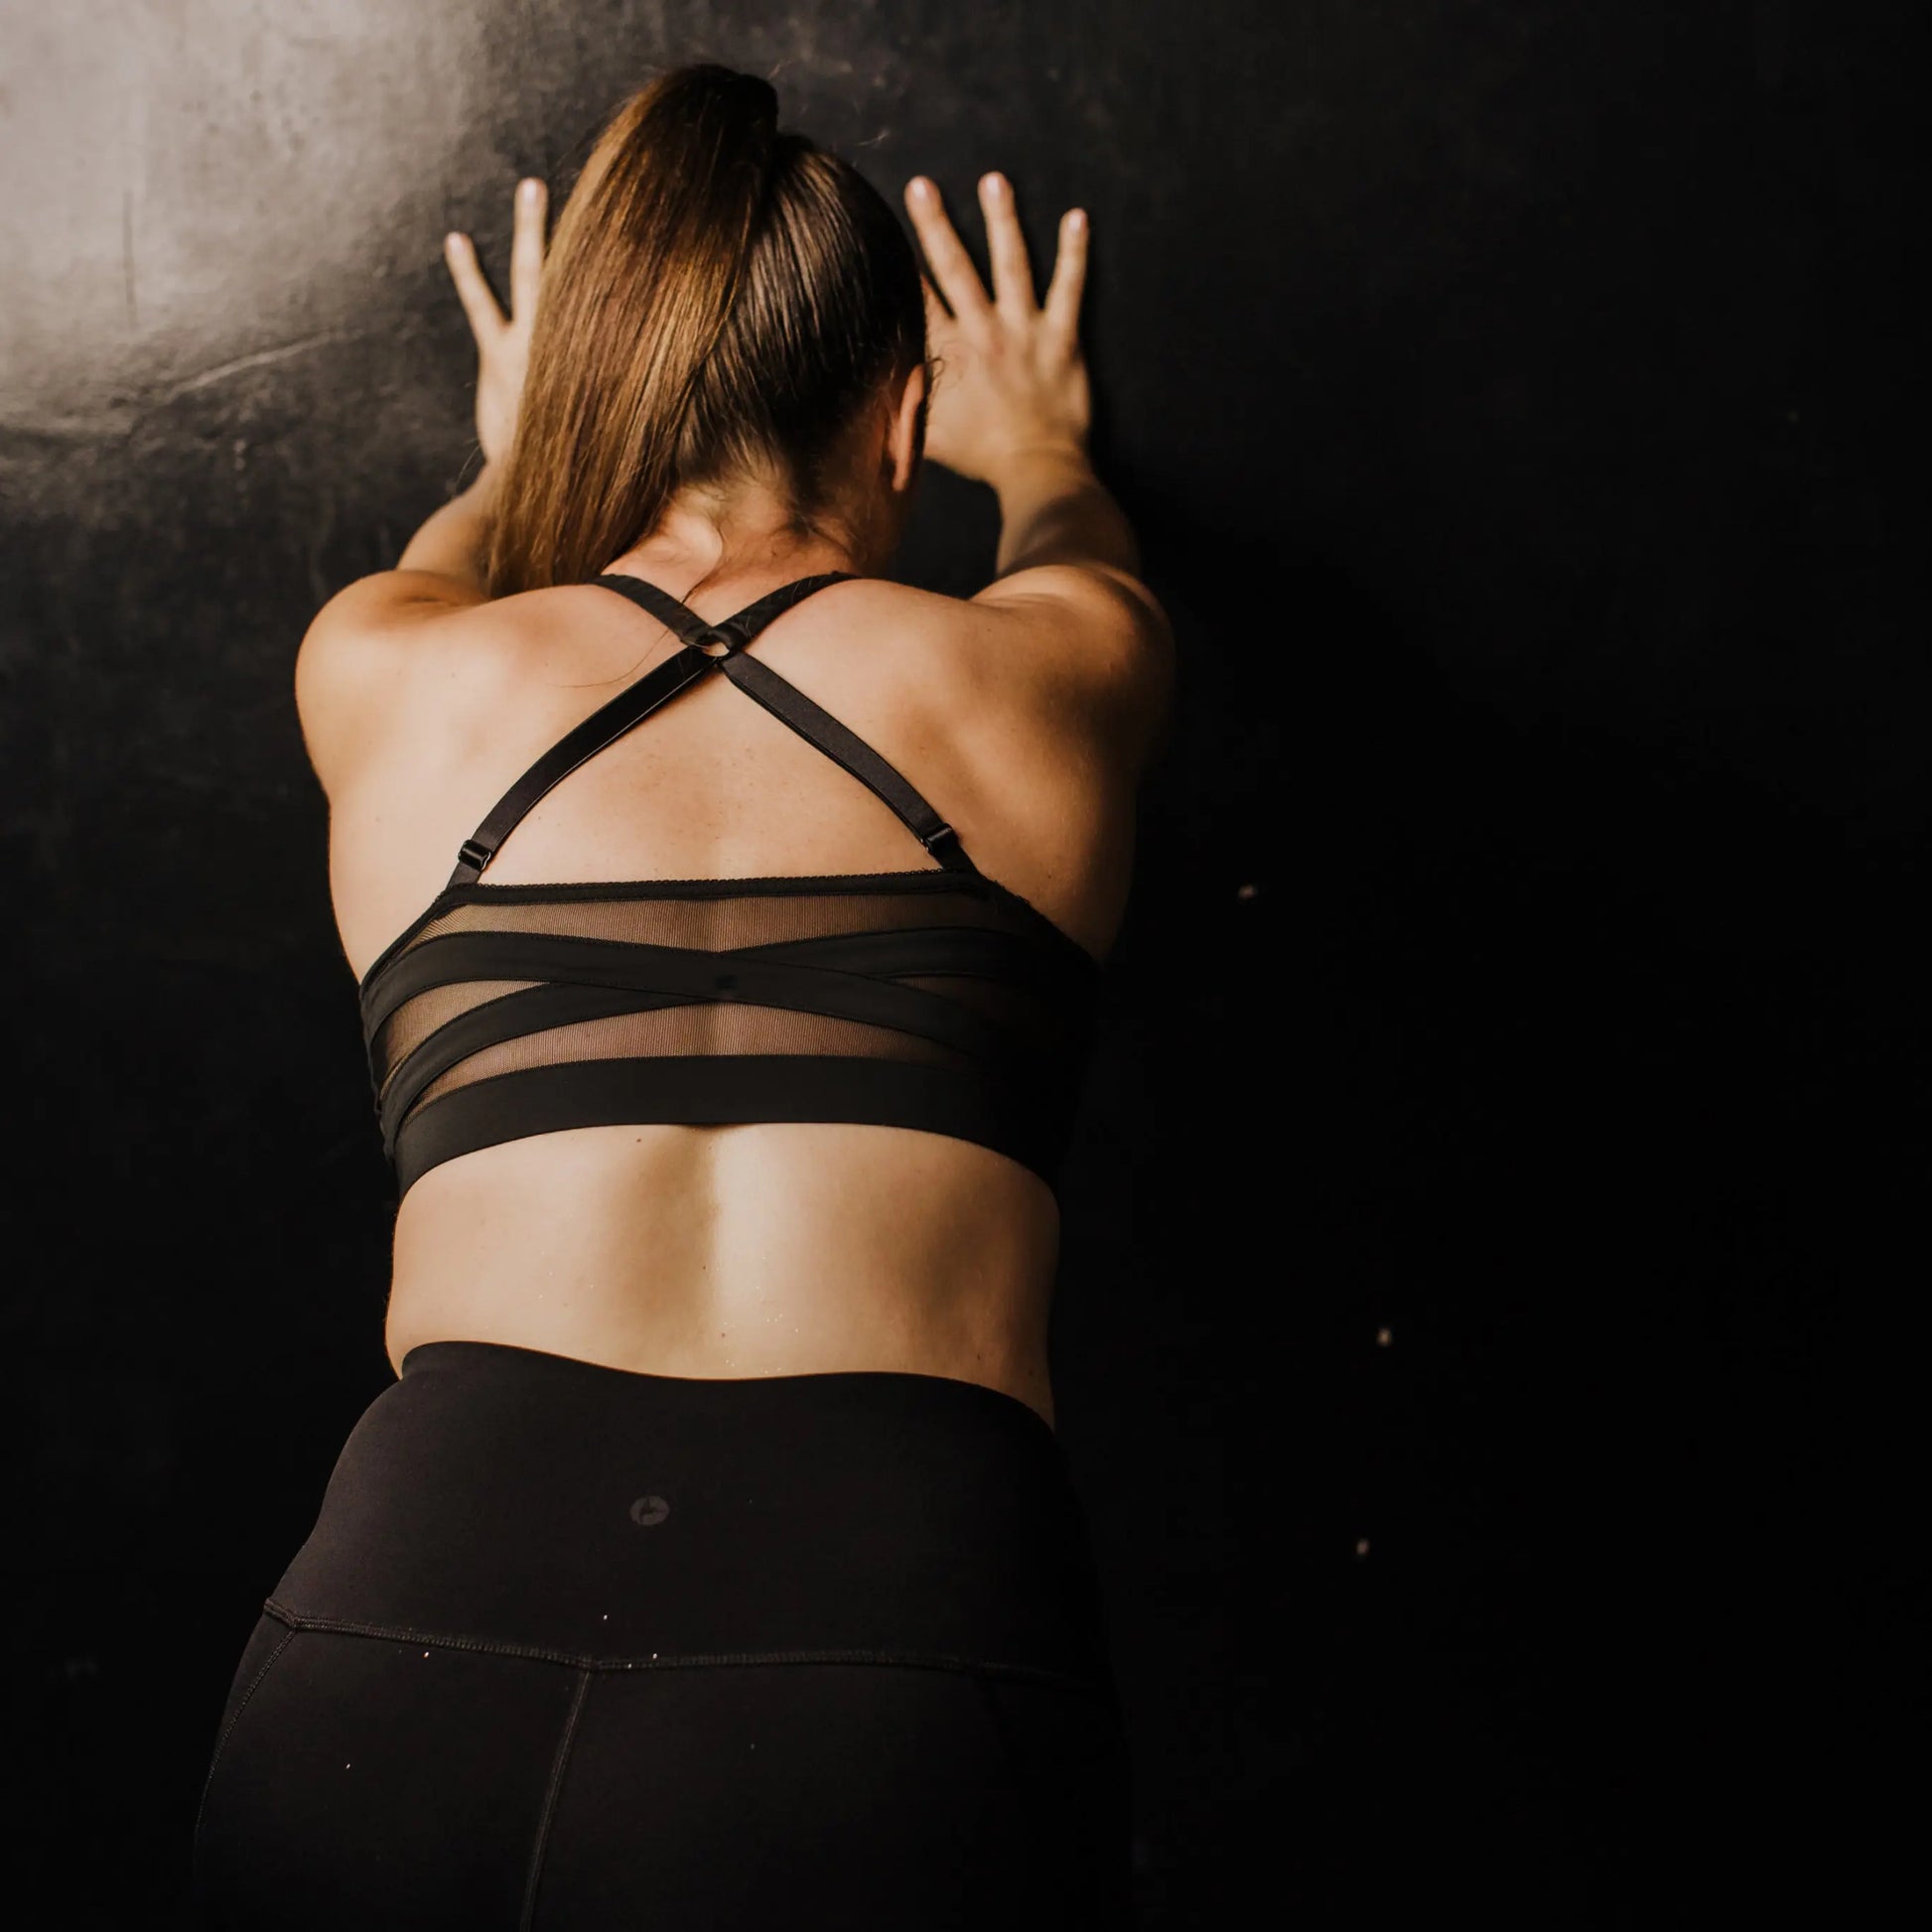 A woman showcases the ultimate comfort and fit of the black power mesh back panel for Wildrax Balconette Sports Bra. The secure hold, achieved through the elastic band and adjustable racer back straps, is proudly displayed on the back of the model as she presses her hands against a black wall